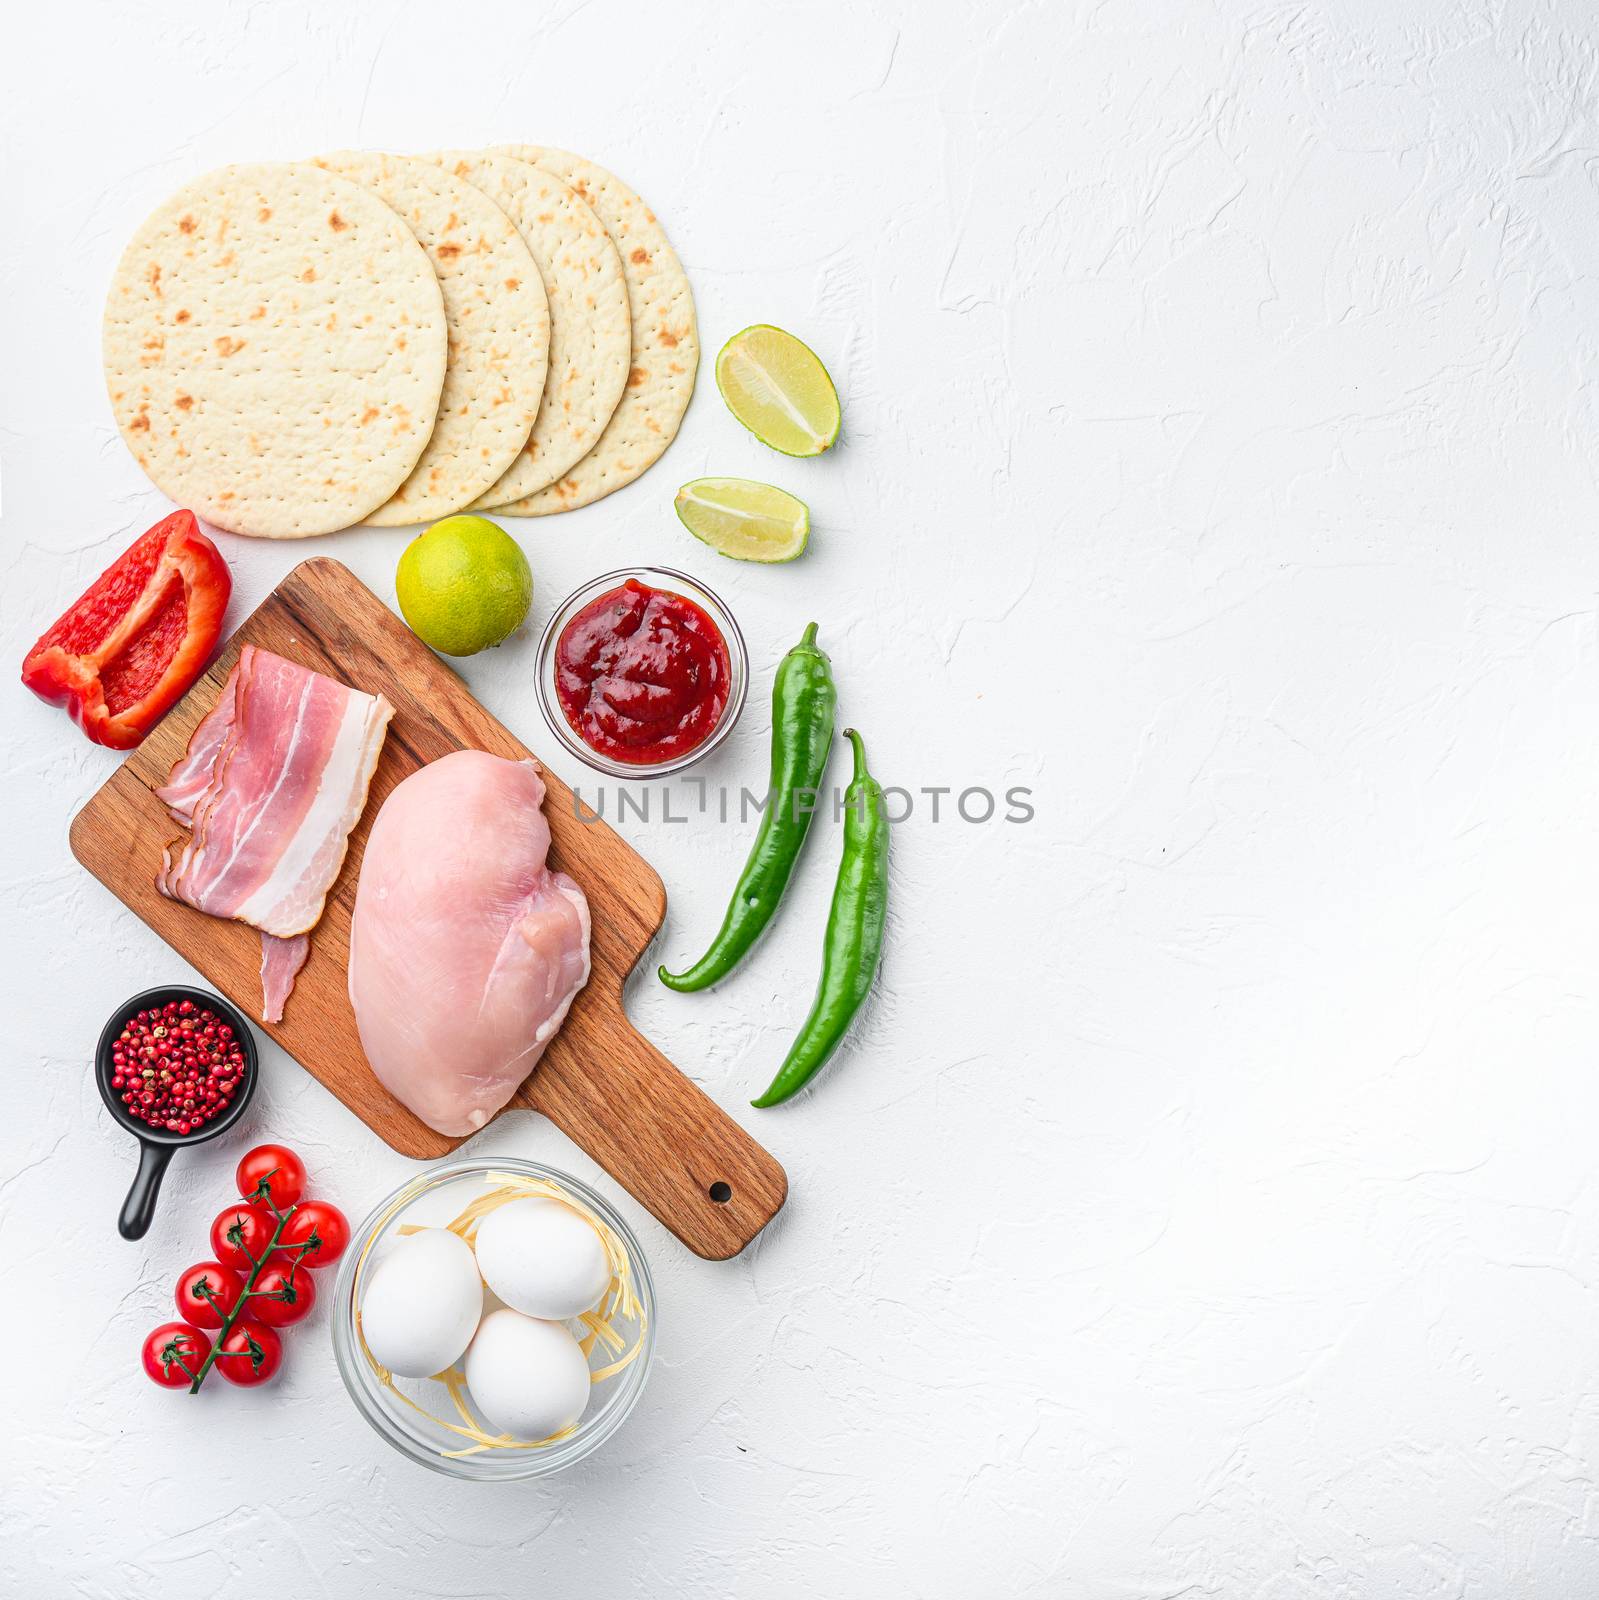 Mexican tacos with vegetables and meat Ingredient for cooking over white textured background, top view with space for text